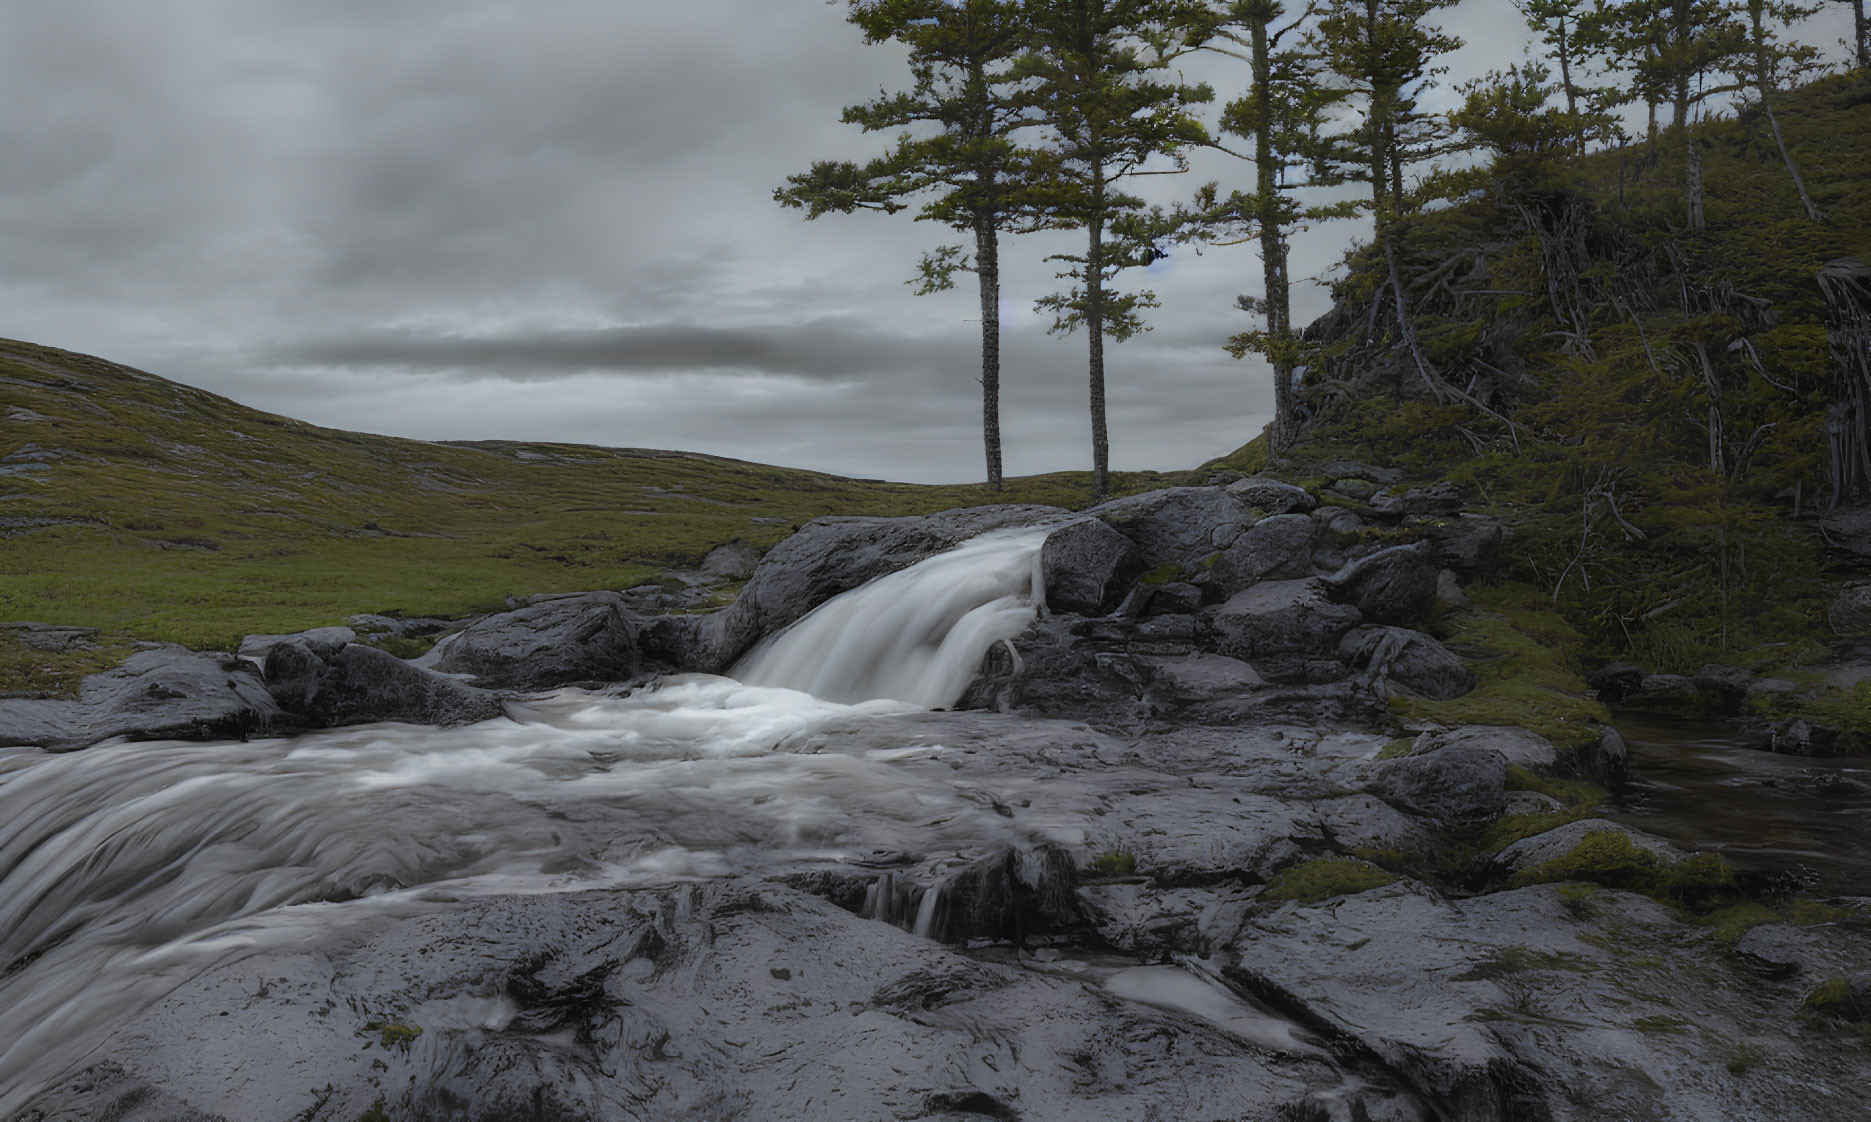 Tranquil waterfall scene with dark rocks, green grass, and cloudy sky